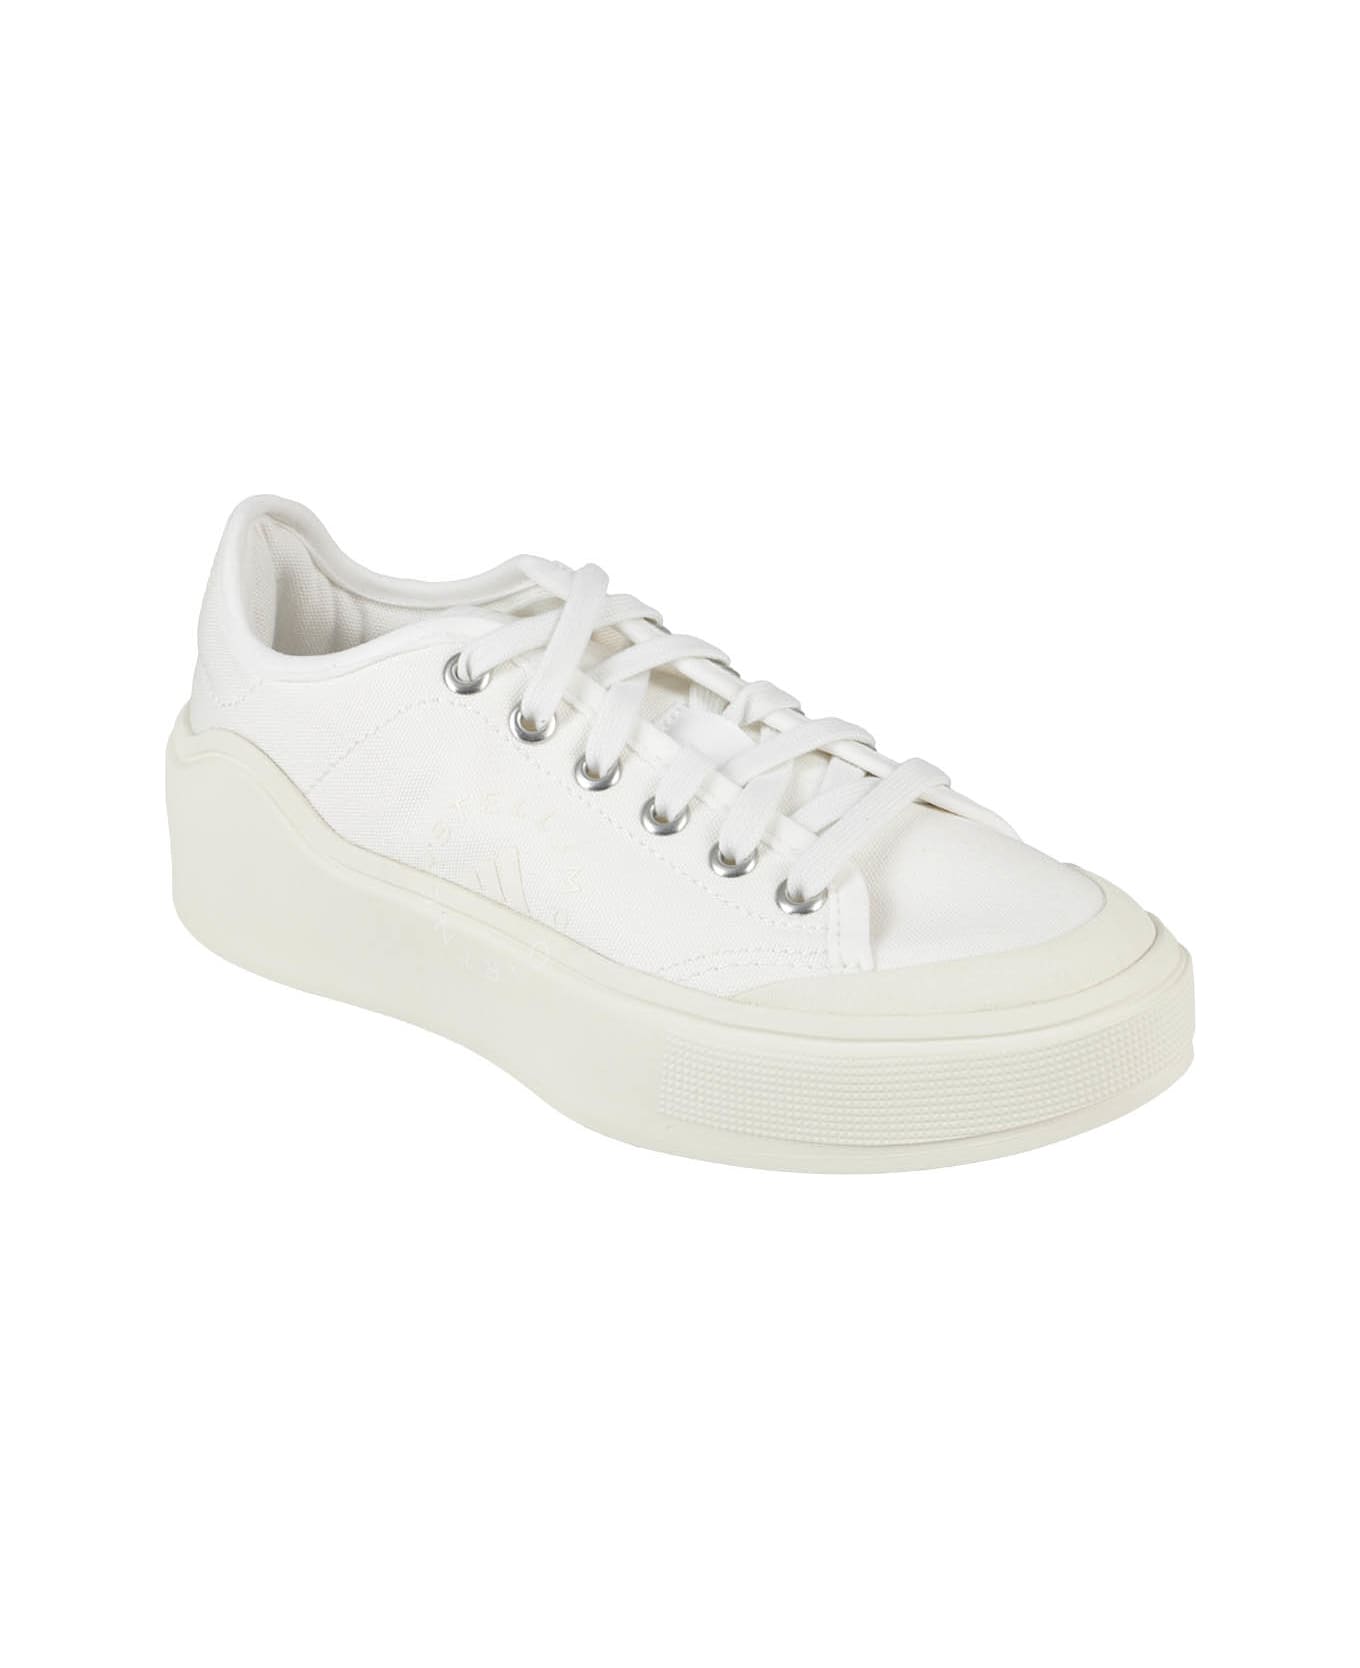 Adidas by Stella McCartney Court Cotton Sneakers Hq8675 - Bianco スニーカー